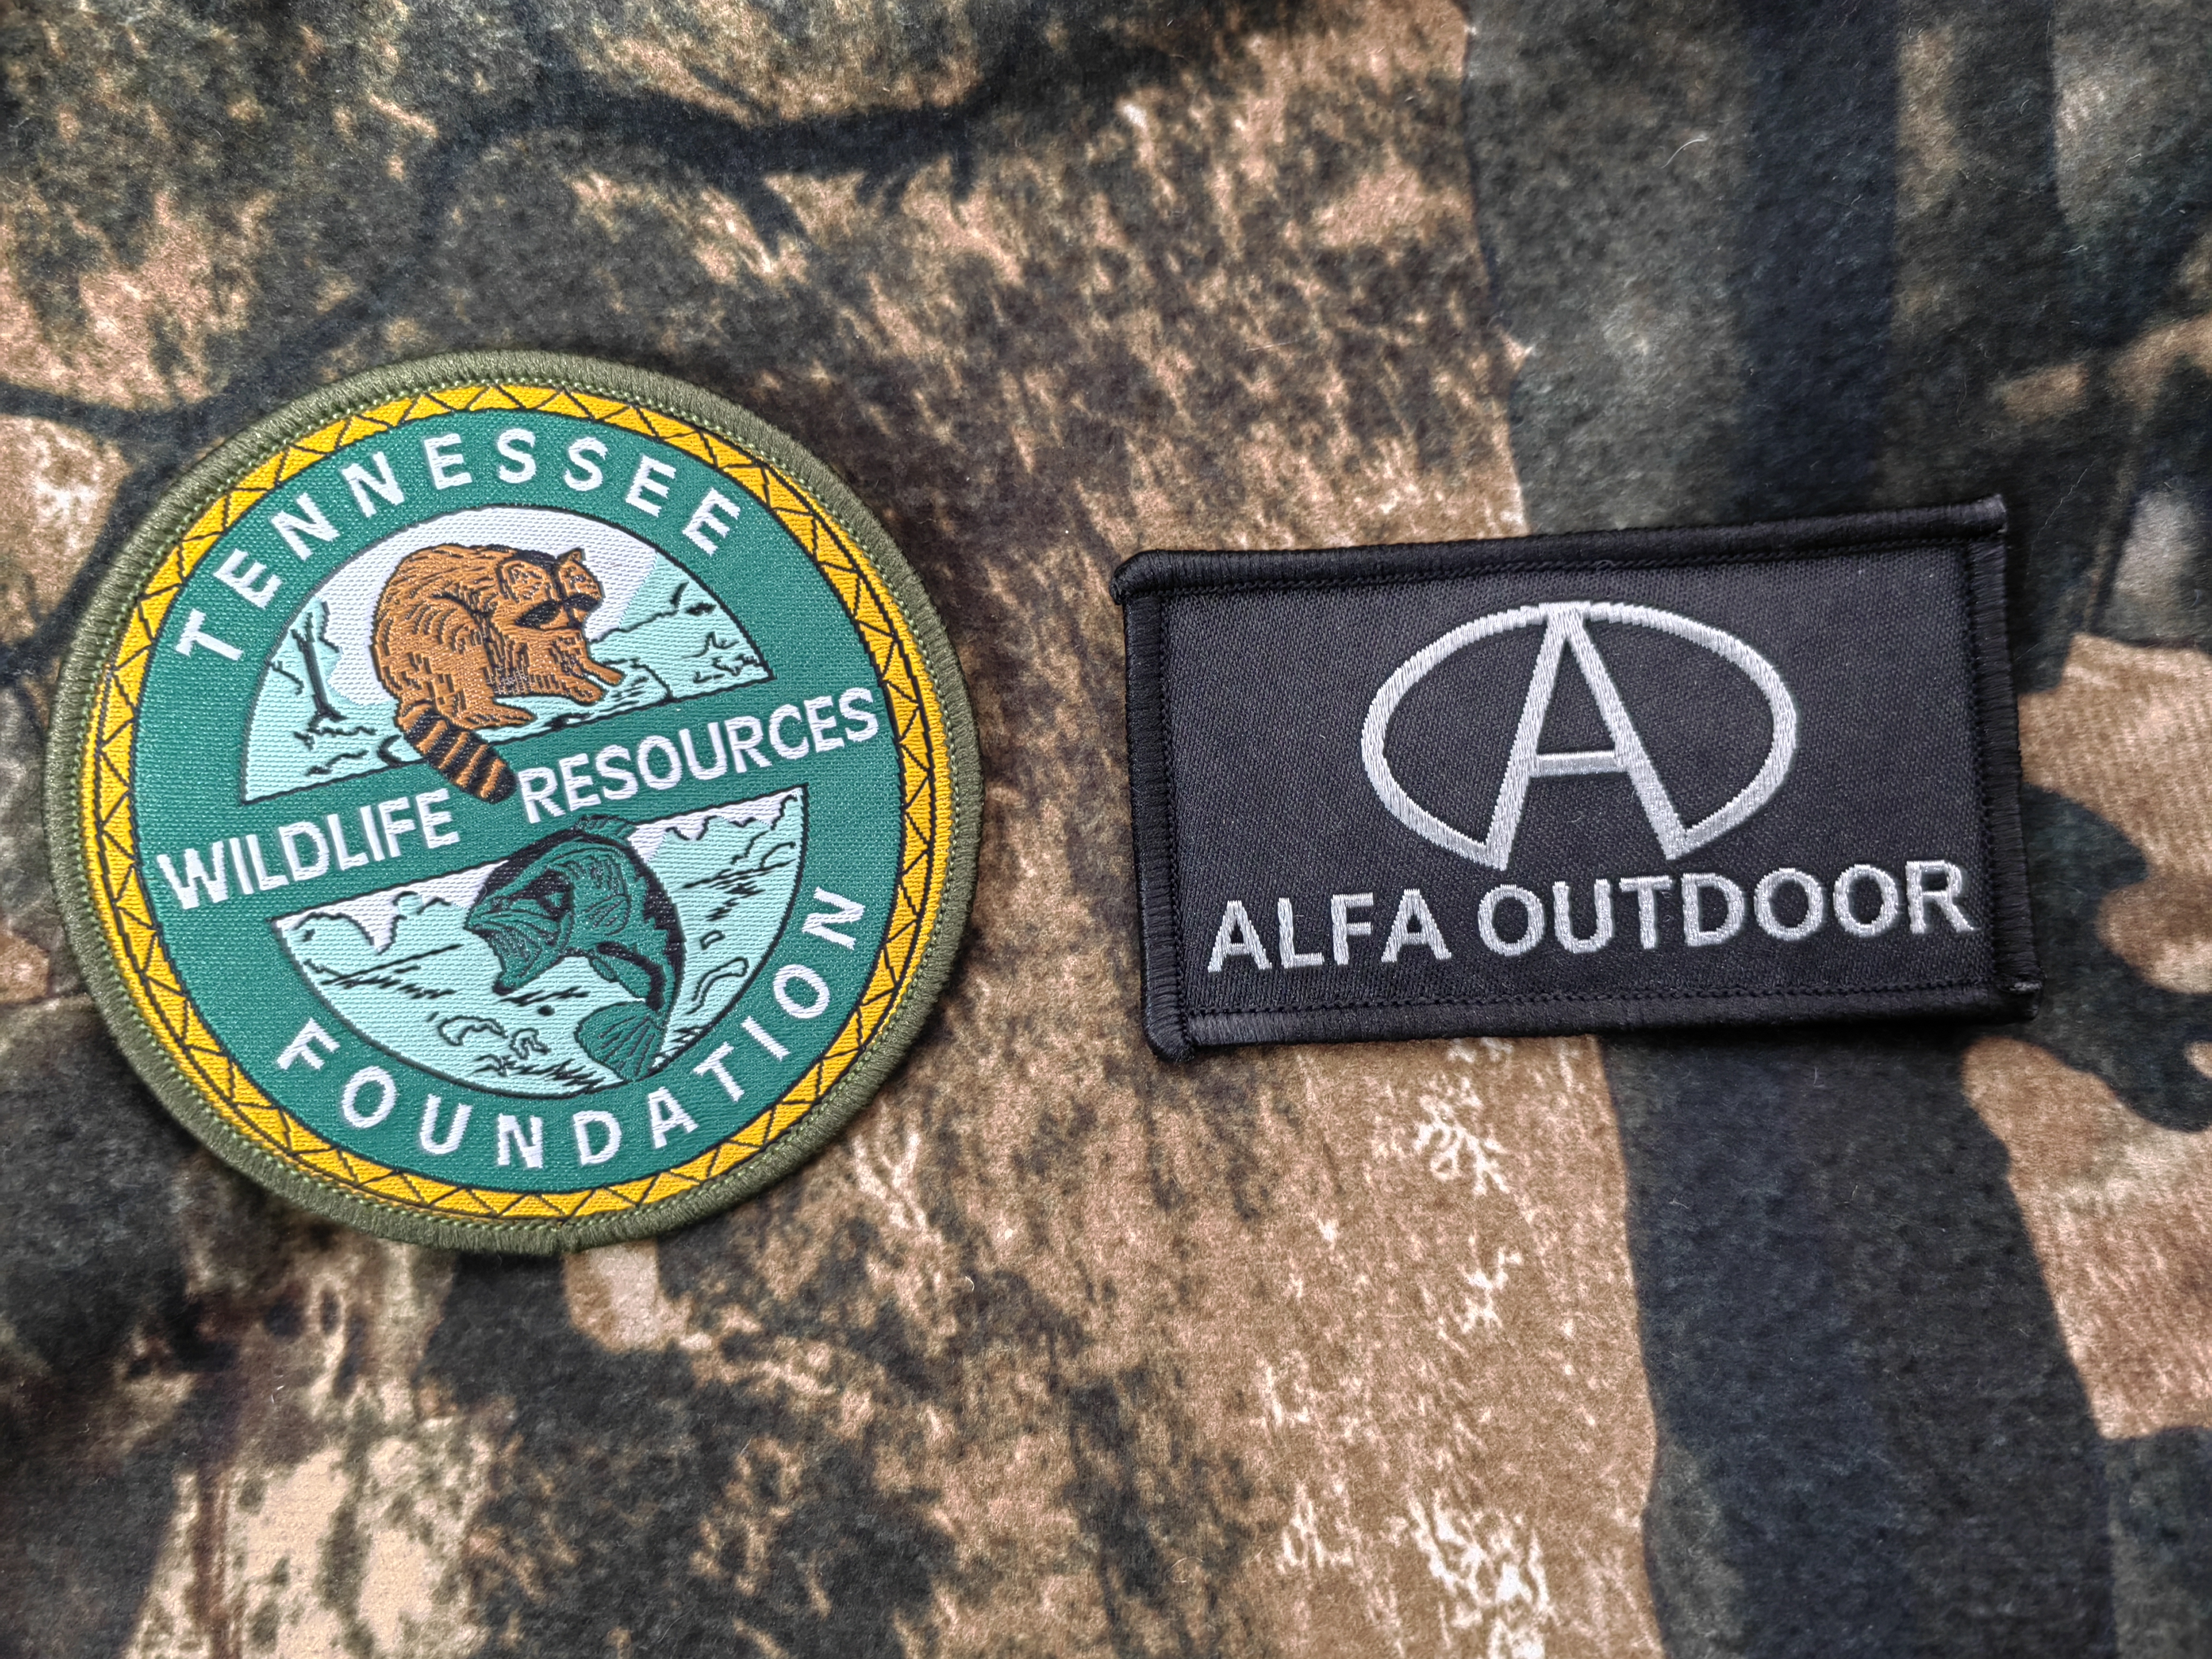 Alfa Outdoor cooperates with Tennessee Wildlife Federation for protection of Welfare.